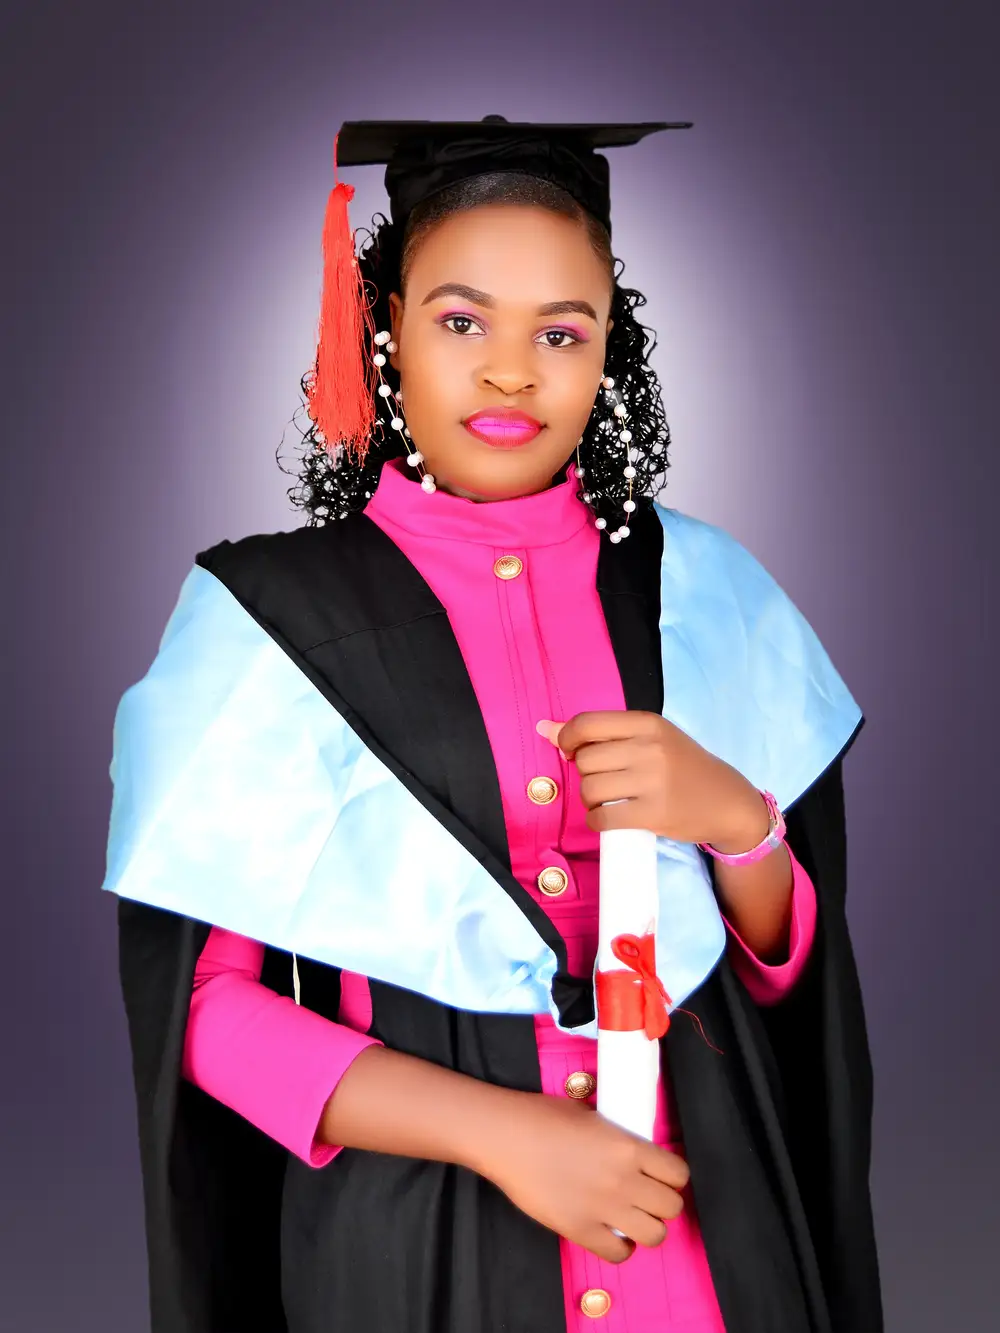 Lady in her Graduation Gown